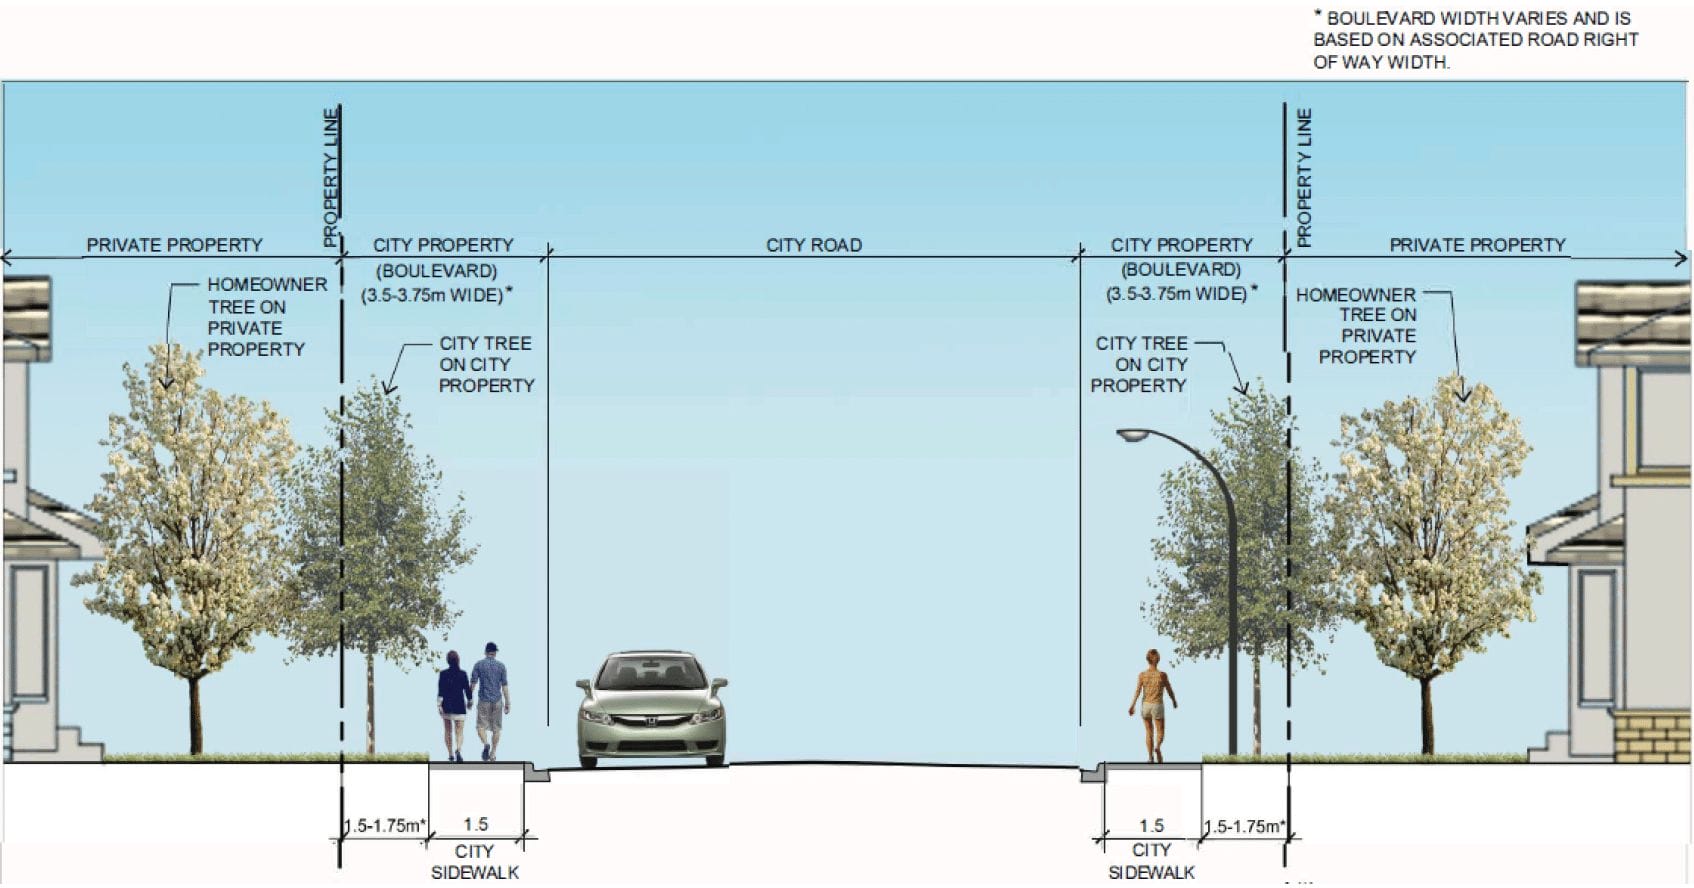 Boulevard illustration that shows various of right of way widths